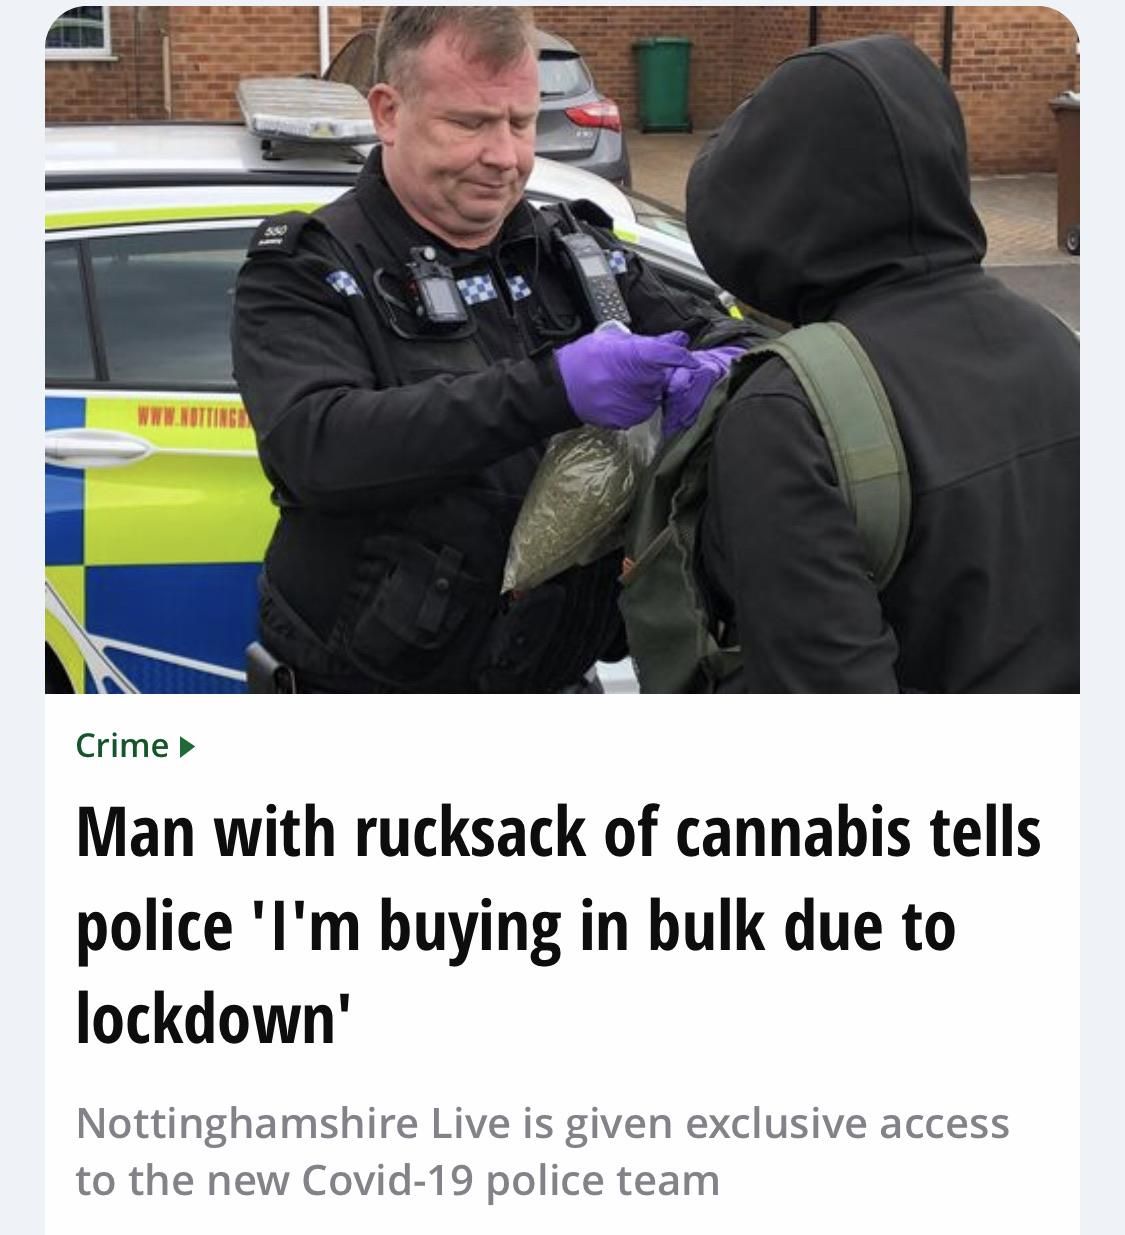 Man with rucksack of cannabis tells police “I’m buying in bulk due to the lockdown”